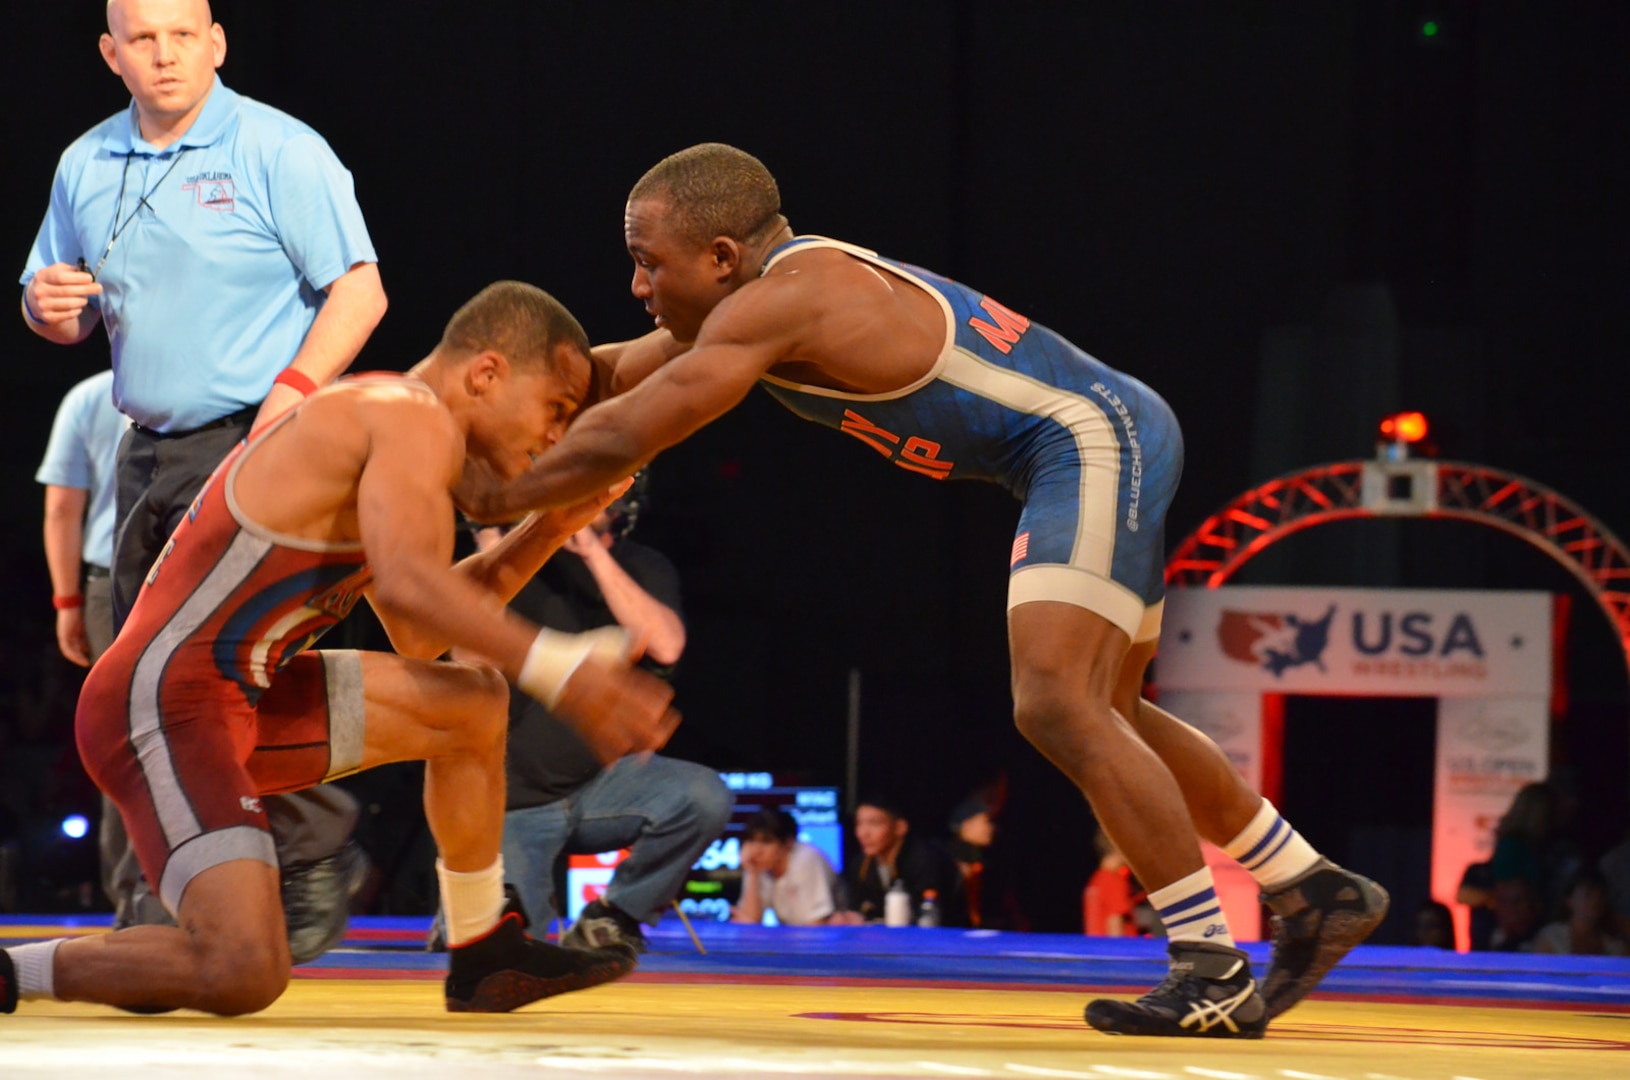 Army Sergeant Spenser Mango (right) wrestles against Army teammate Specialist Jermaine Hodge in the 59 kg/130 lbs Men's Greco-Roman Division.  Mango won his 6th National Greco-Roman title and Hodge placed third overall.